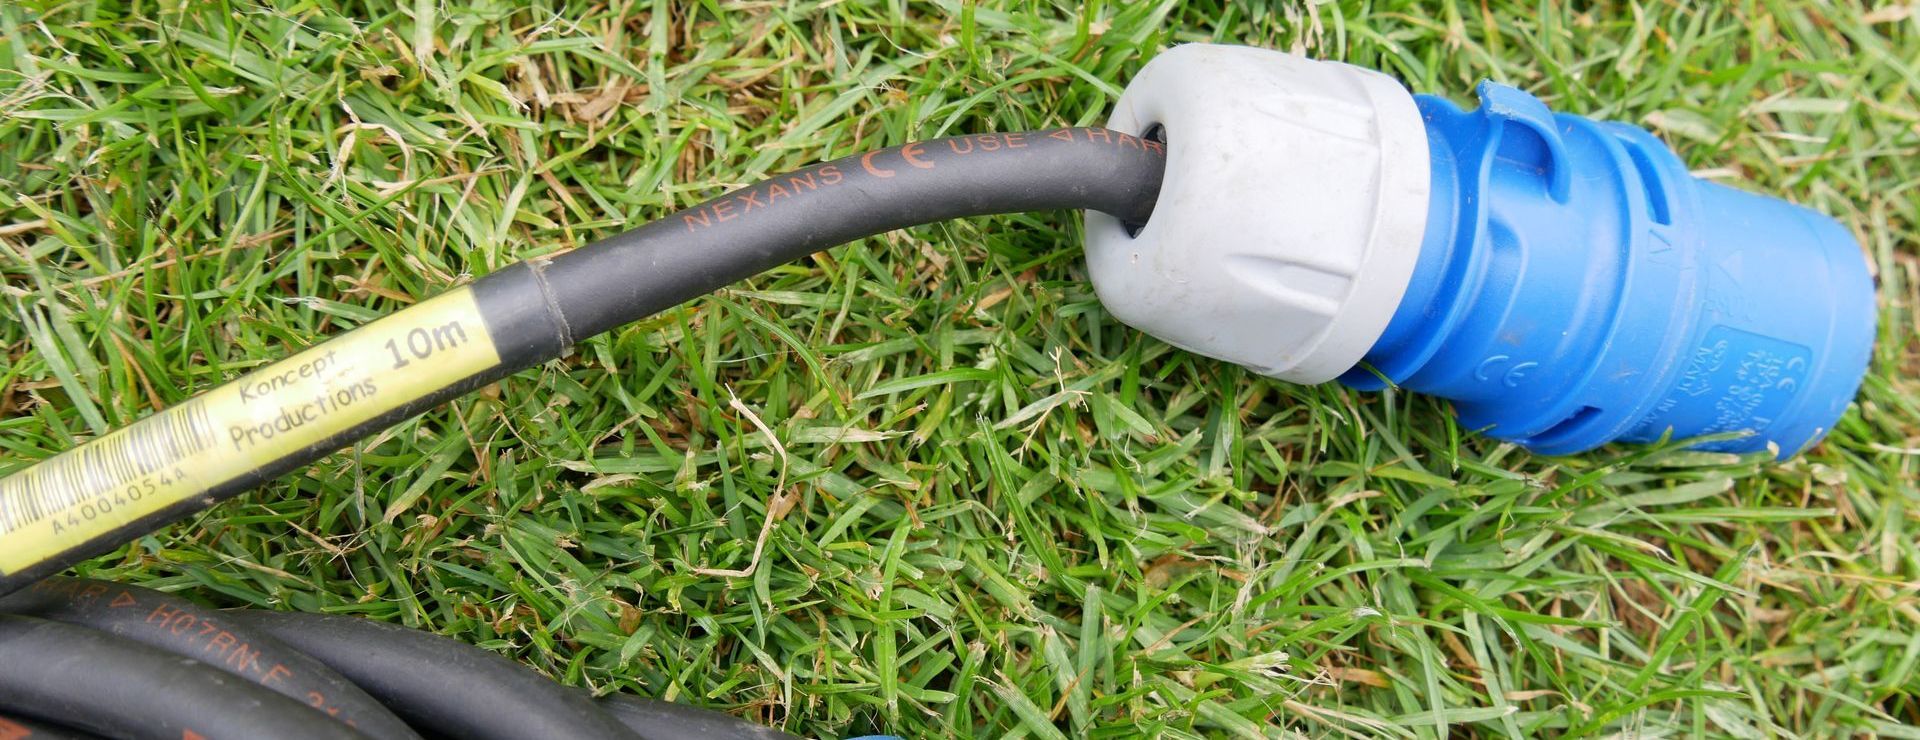 Outdoor event field with a cable with a blue plug on the end